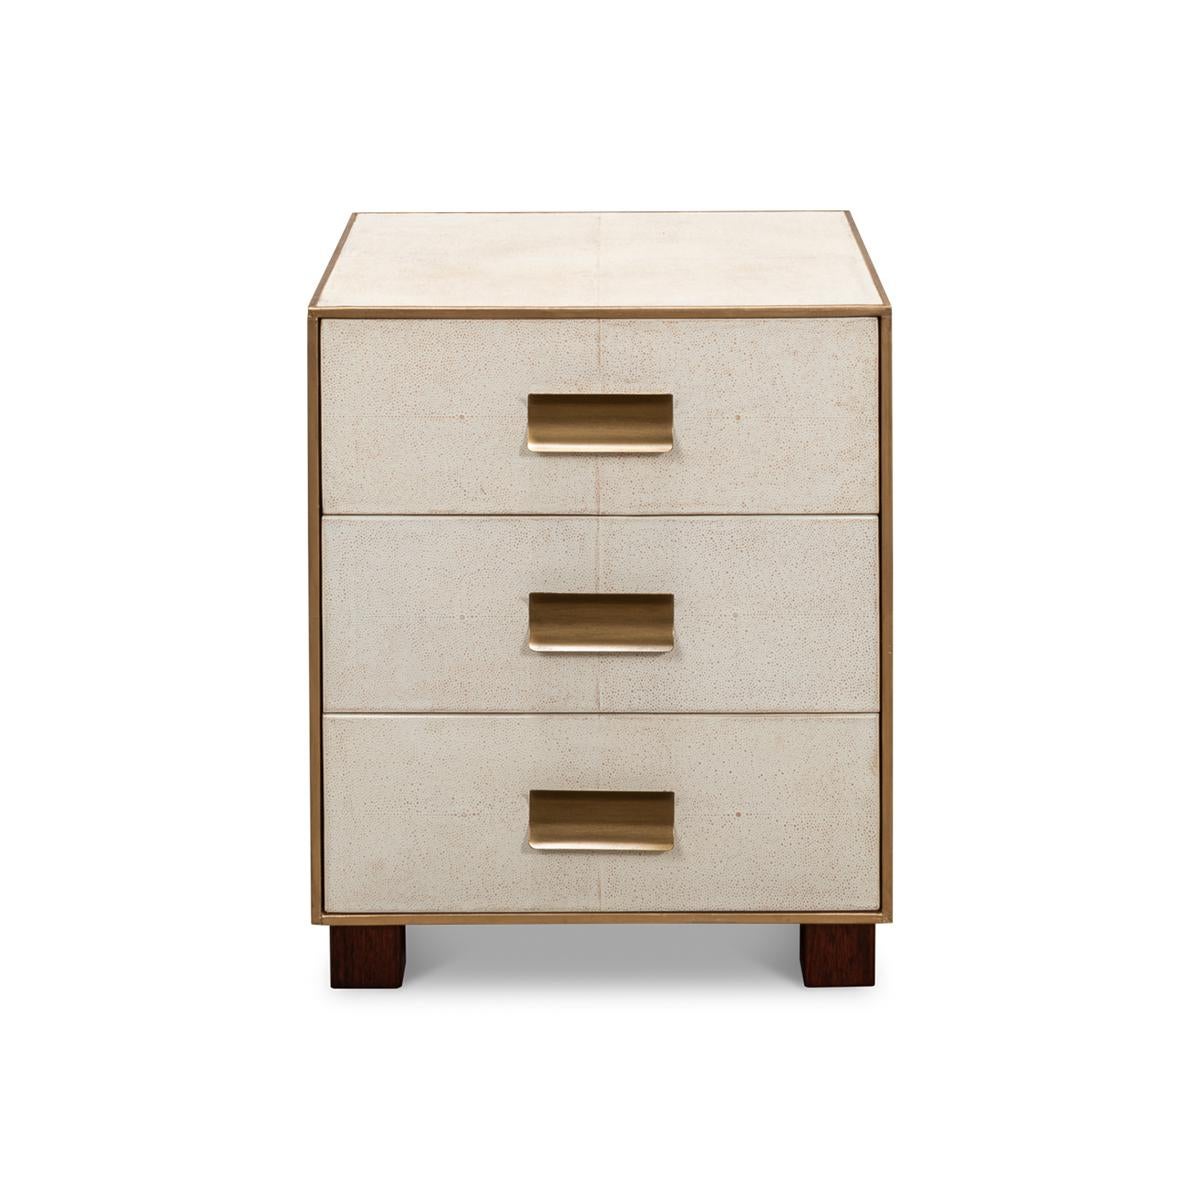 Wrapped in a faux shagreen leather in the osprey white leather. With gold highlights and trim, three drawers raised on short block feet.

Dimensions: 20